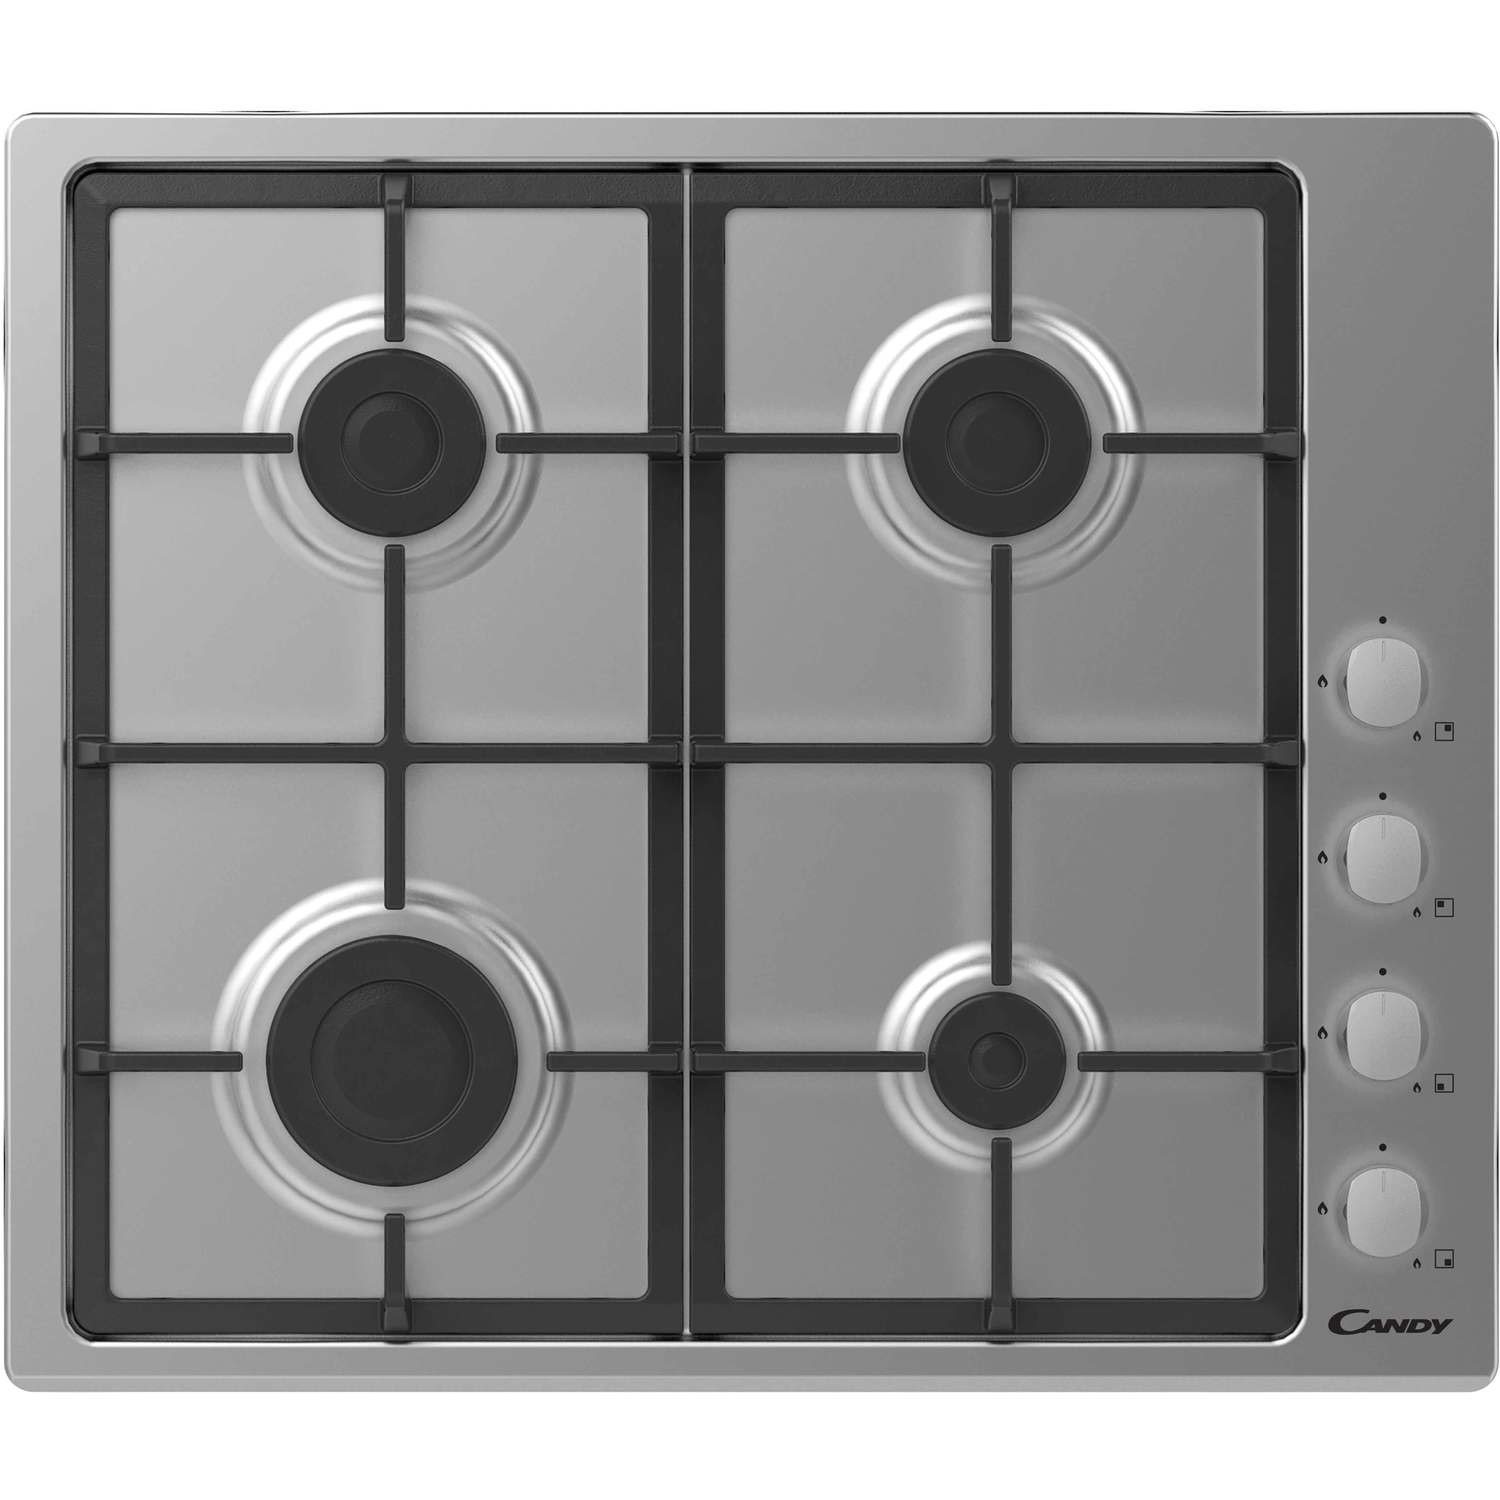 Candy 60cm 4 Burner Gas Hob with Cast Iron Pan Stands - Stainless Steel